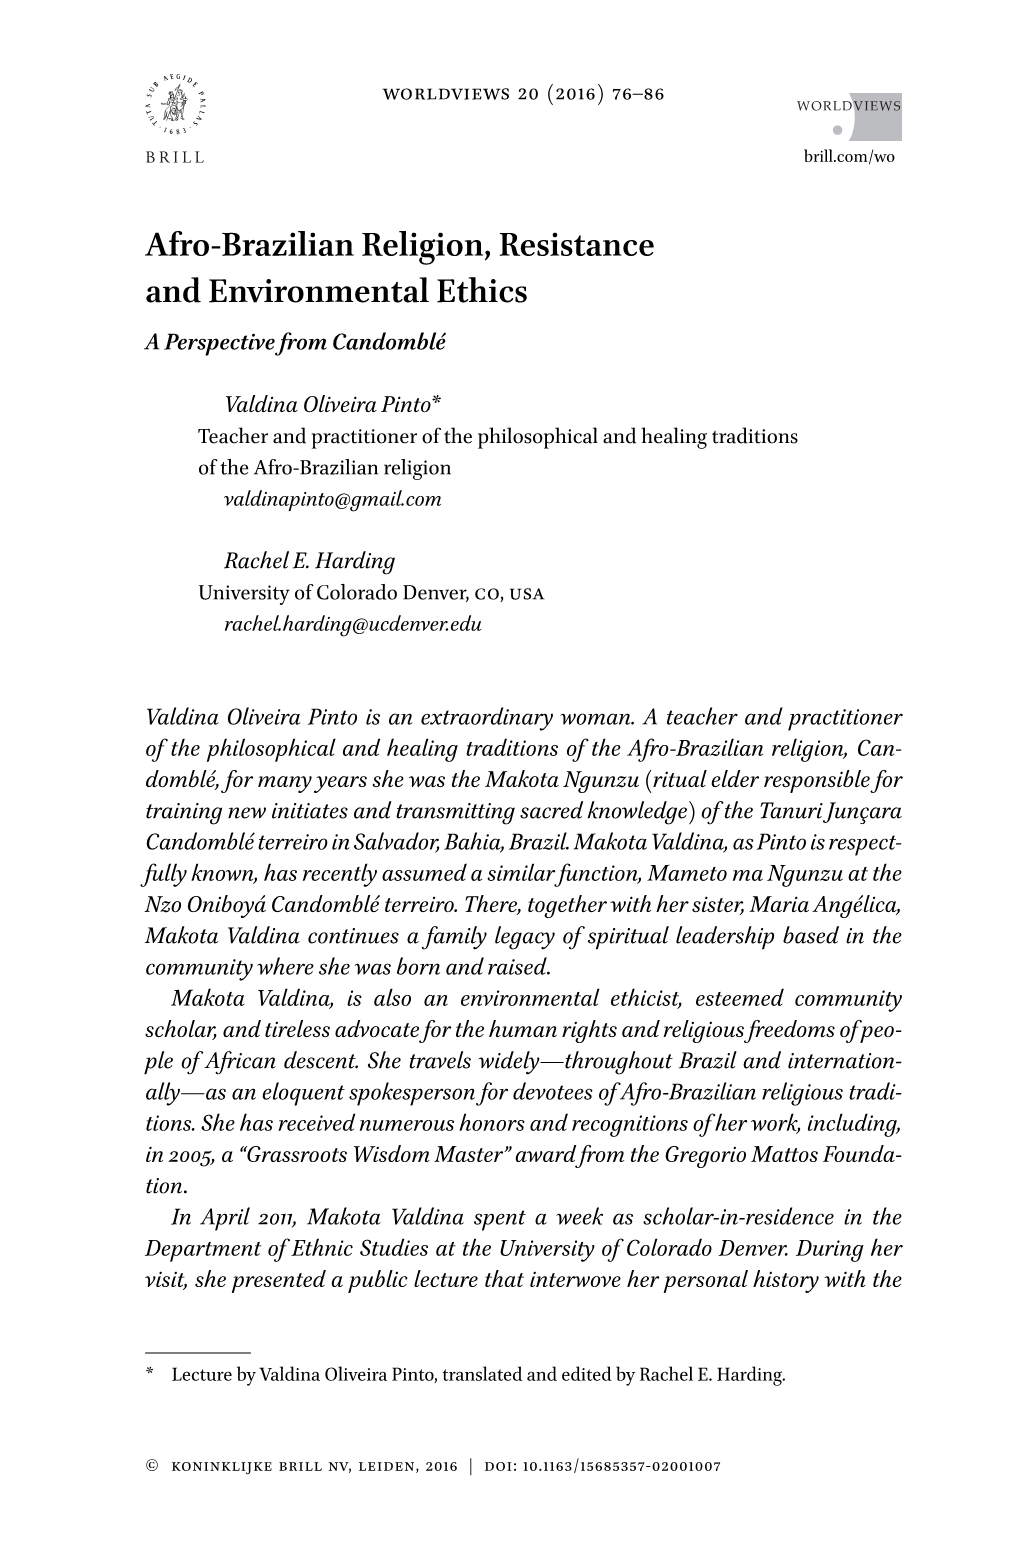 Afro-Brazilian Religion, Resistance and Environmental Ethics a Perspective from Candomblé